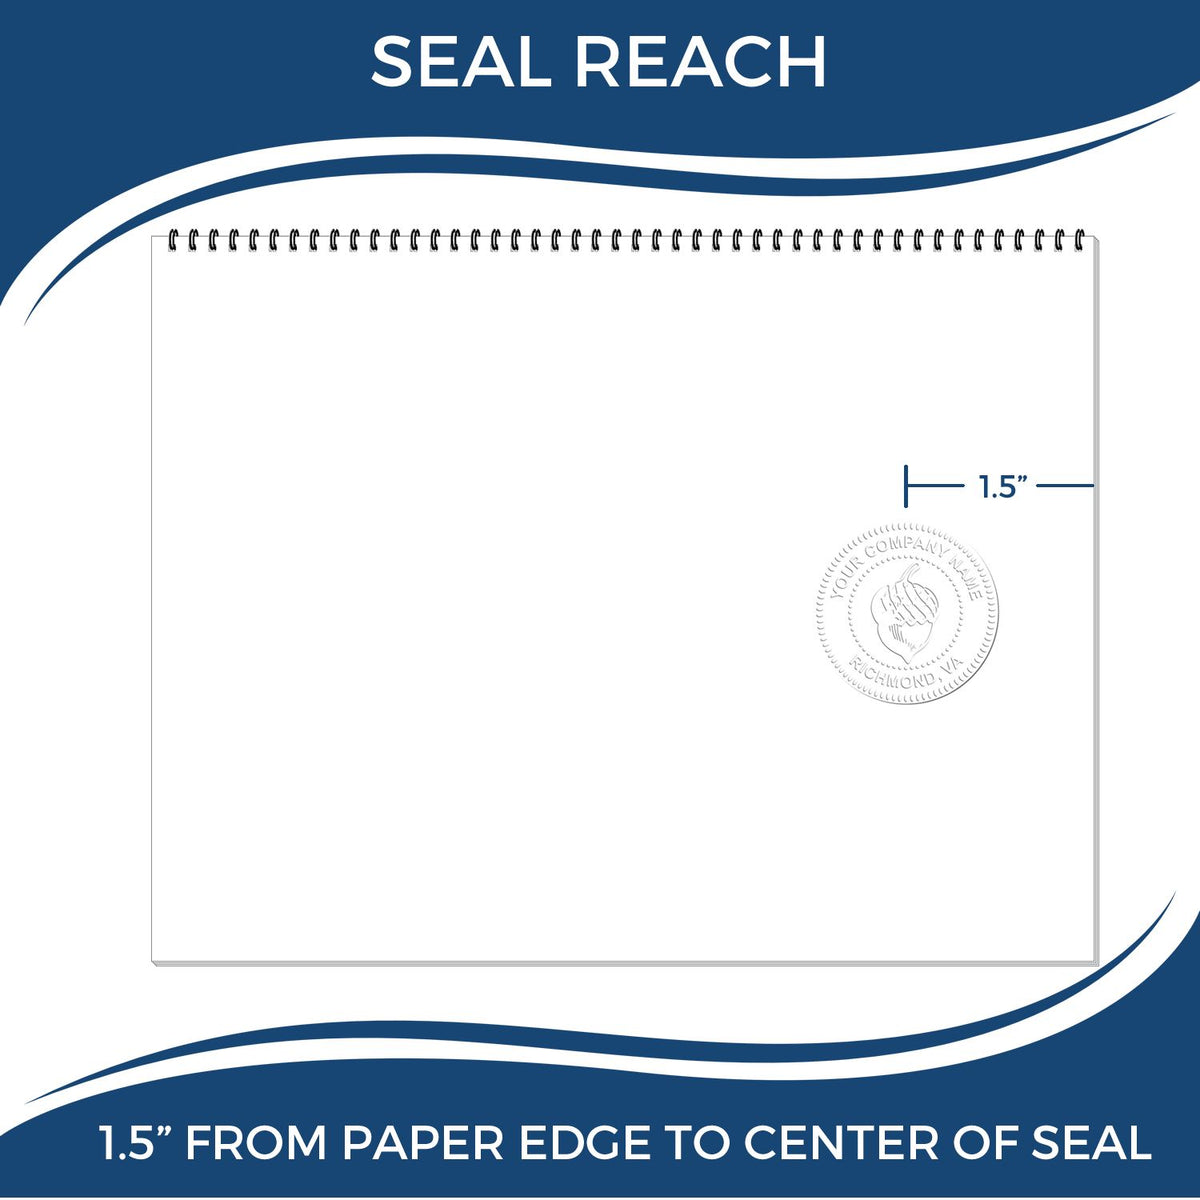 An infographic showing the seal reach which is represented by a ruler and a miniature seal image of the Hybrid Alaska Landscape Architect Seal